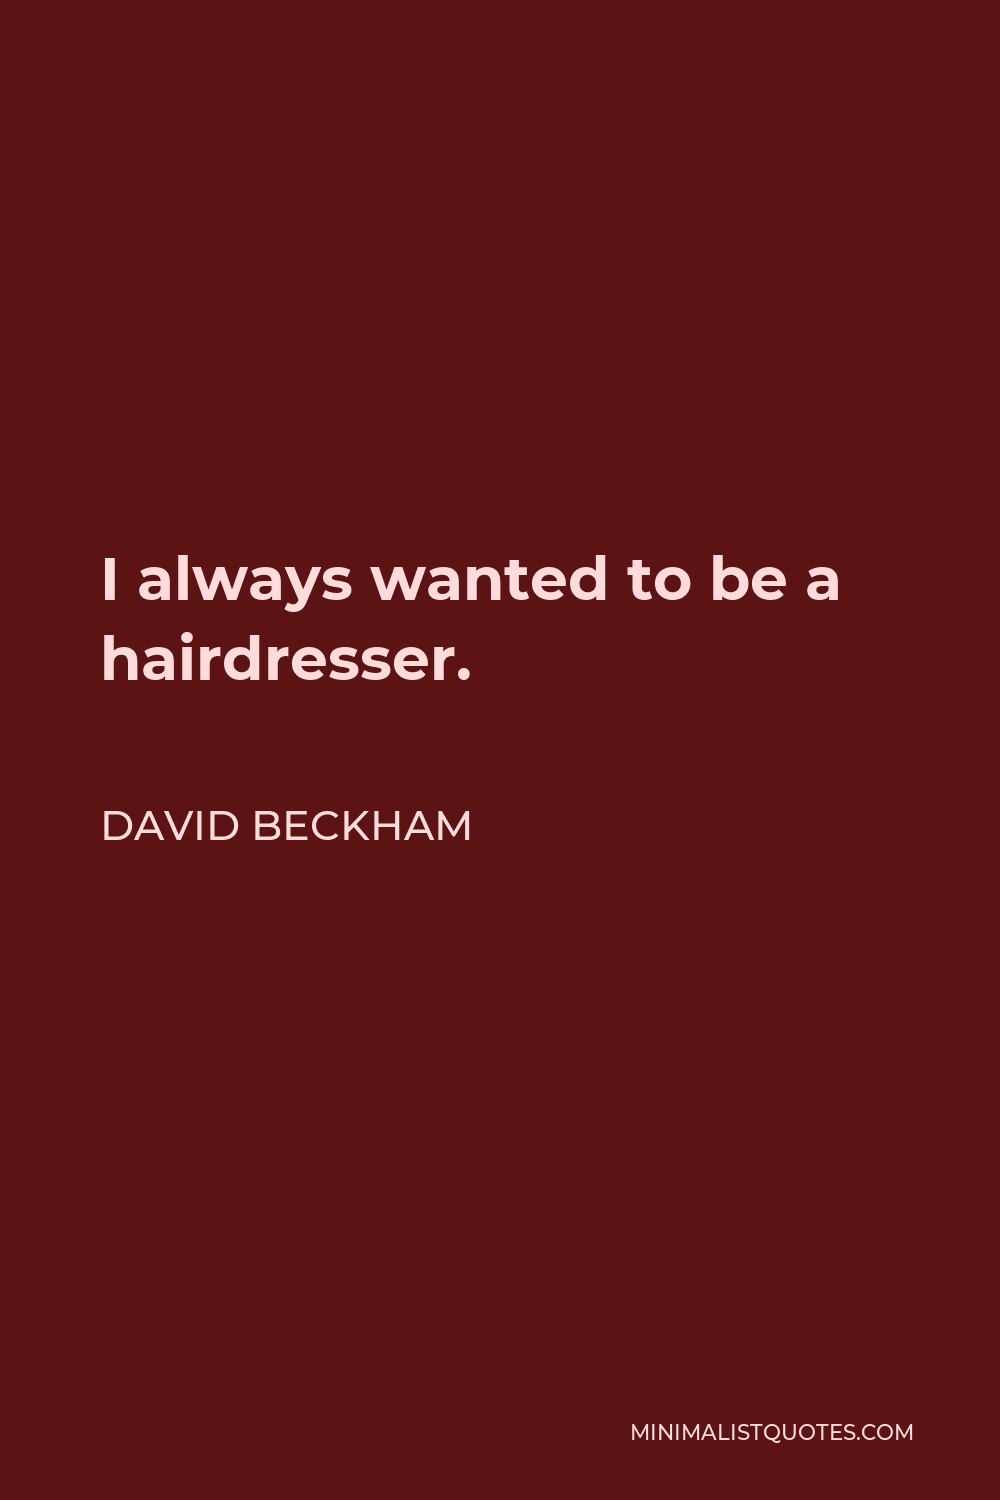 David Beckham Quote - I always wanted to be a hairdresser.